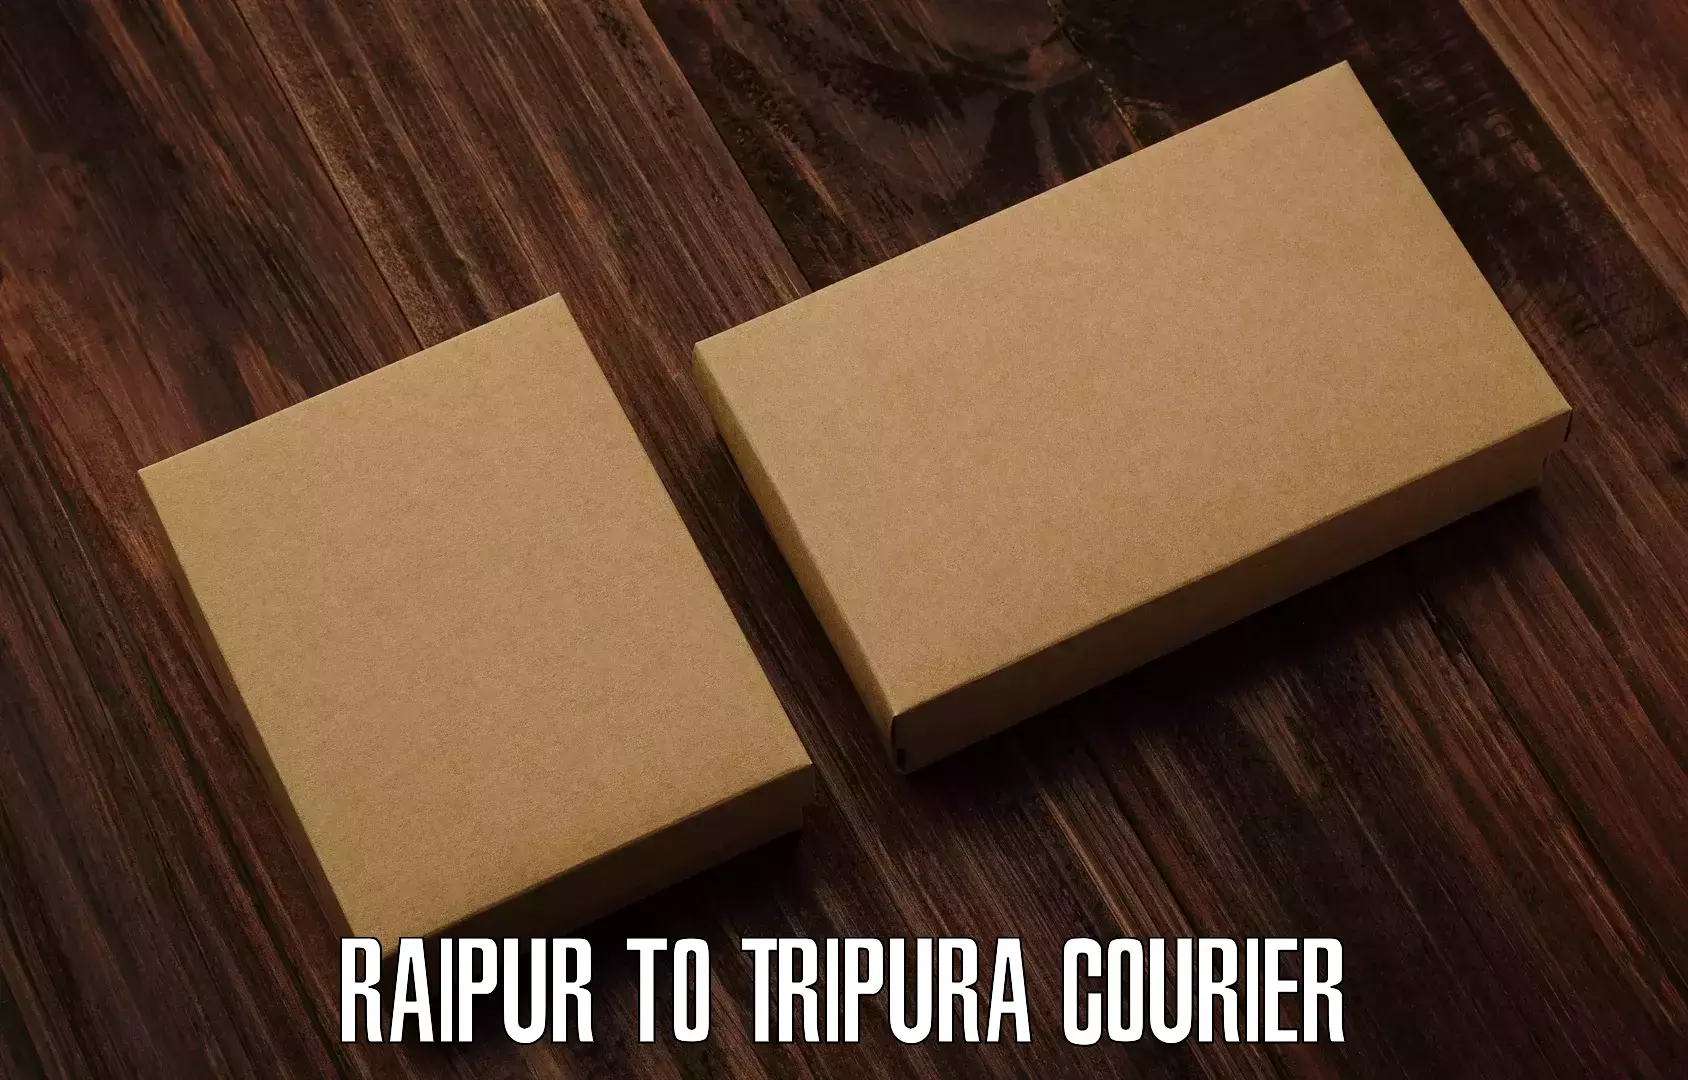 Nationwide parcel services Raipur to Tripura